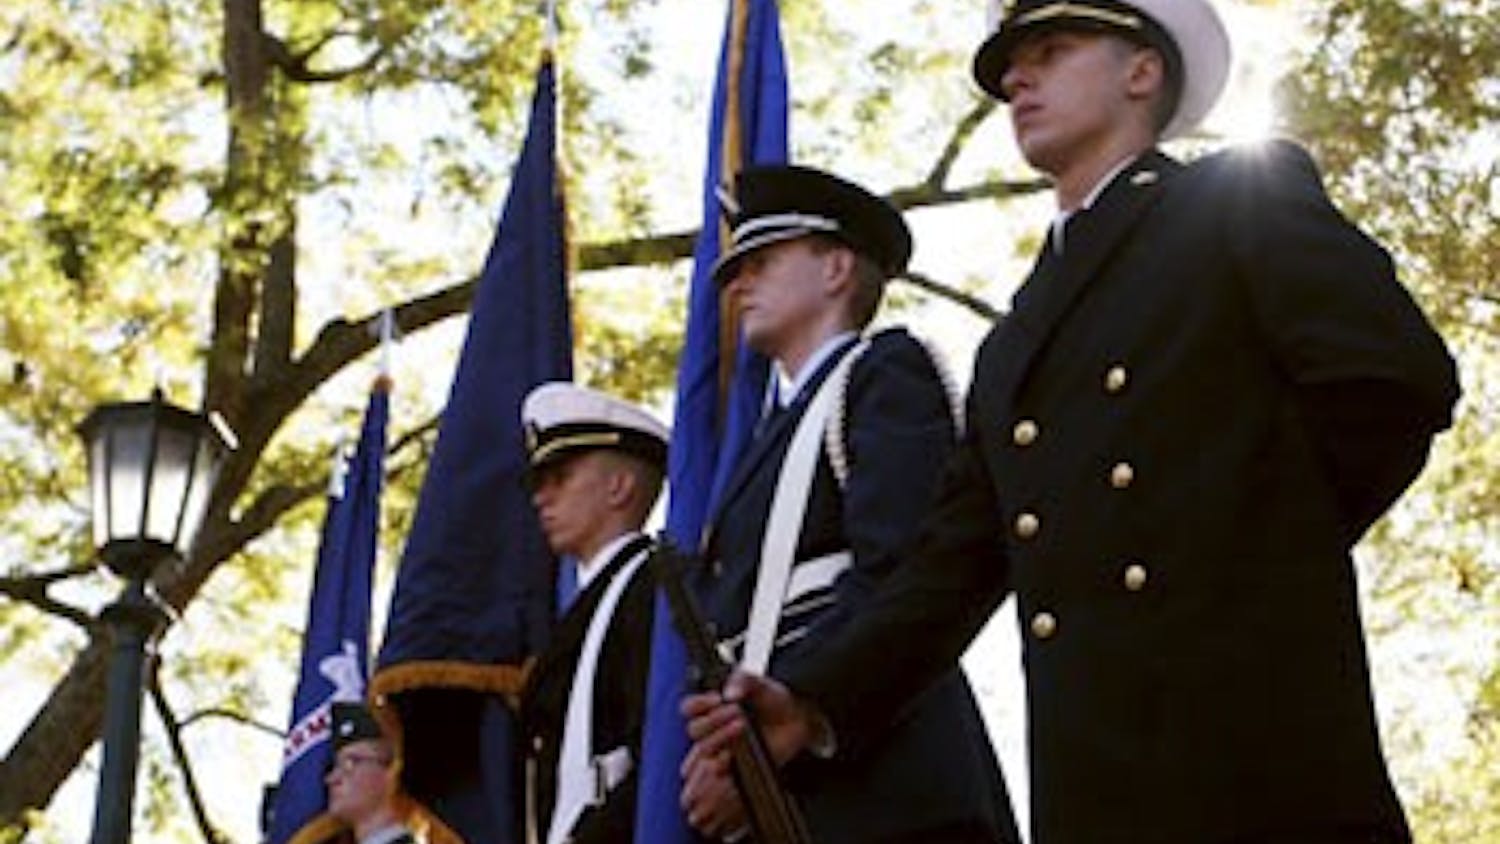 The ROTC color guard stands ready near Memorial Hall before the commencement of the Veterans Day ceremony in&nbsp;2013.